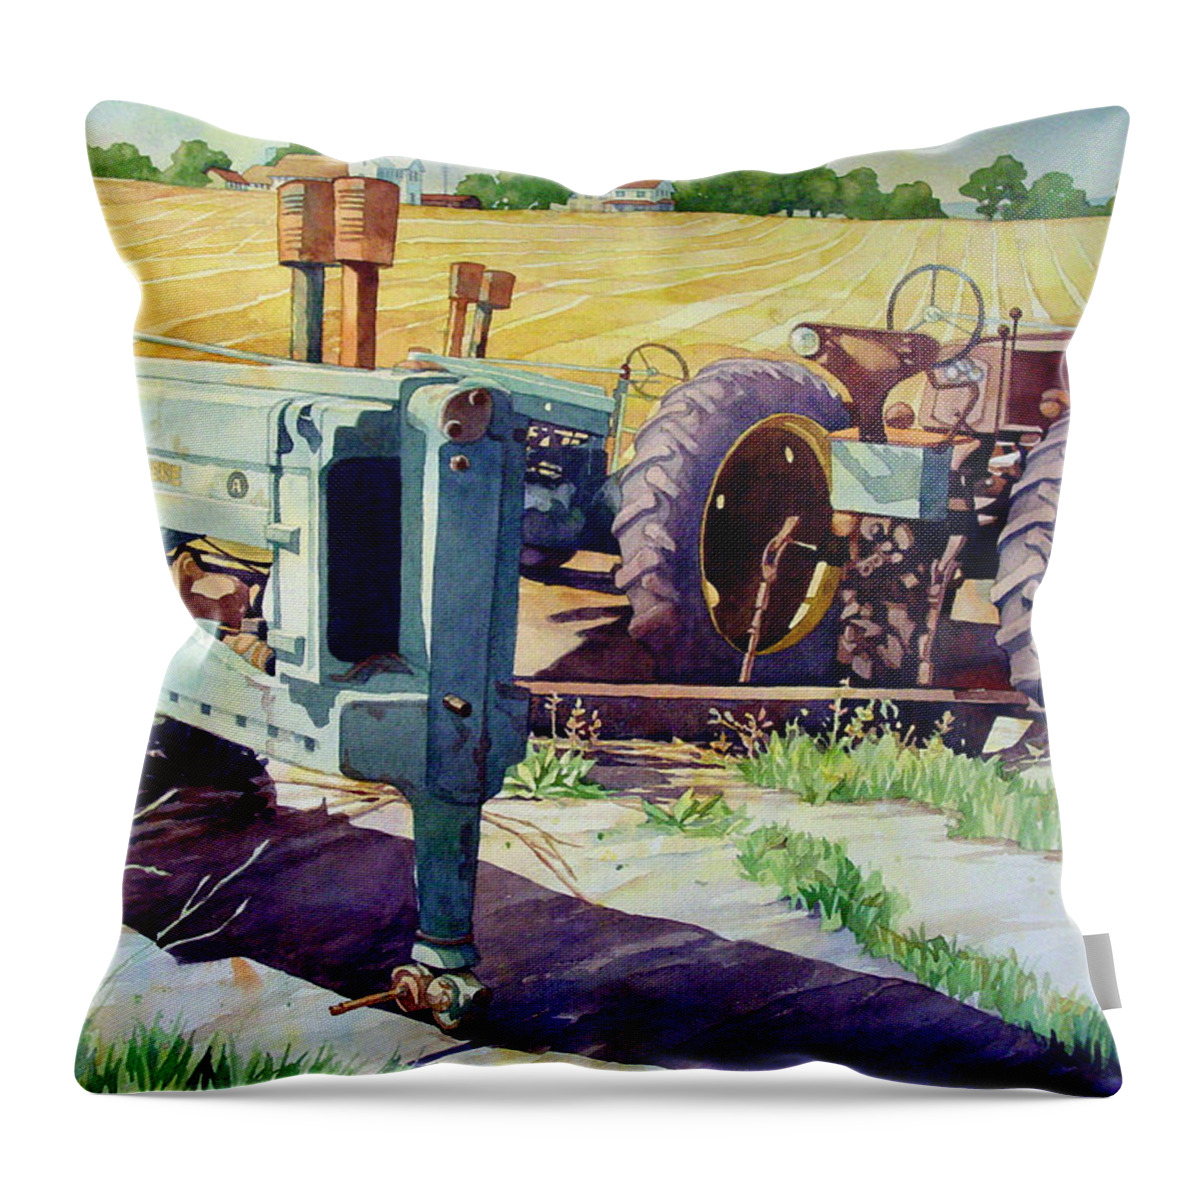 Rustic Throw Pillow featuring the painting Yesterday's News by Mick Williams